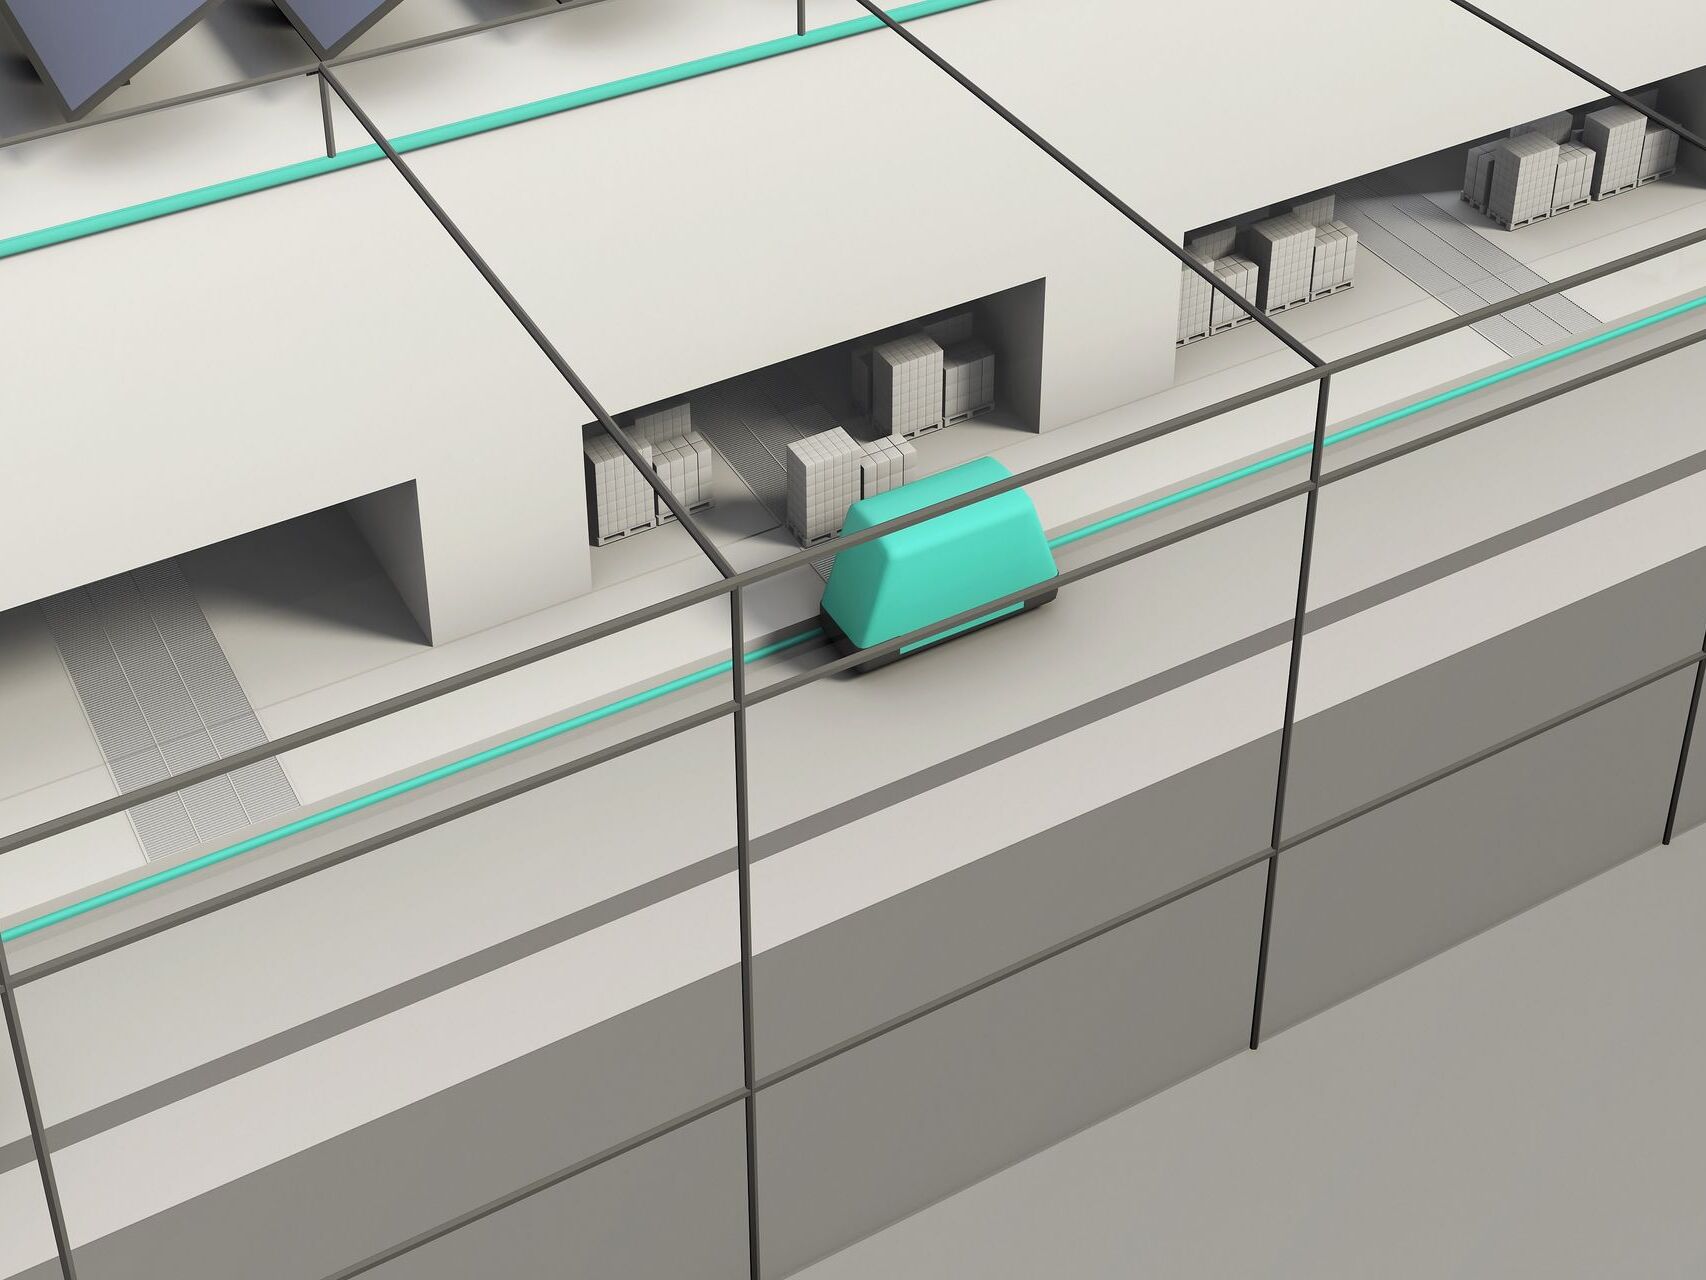 3D simulation of a detail of the Hub and part of the Cargo Sous Terrain logistic connection